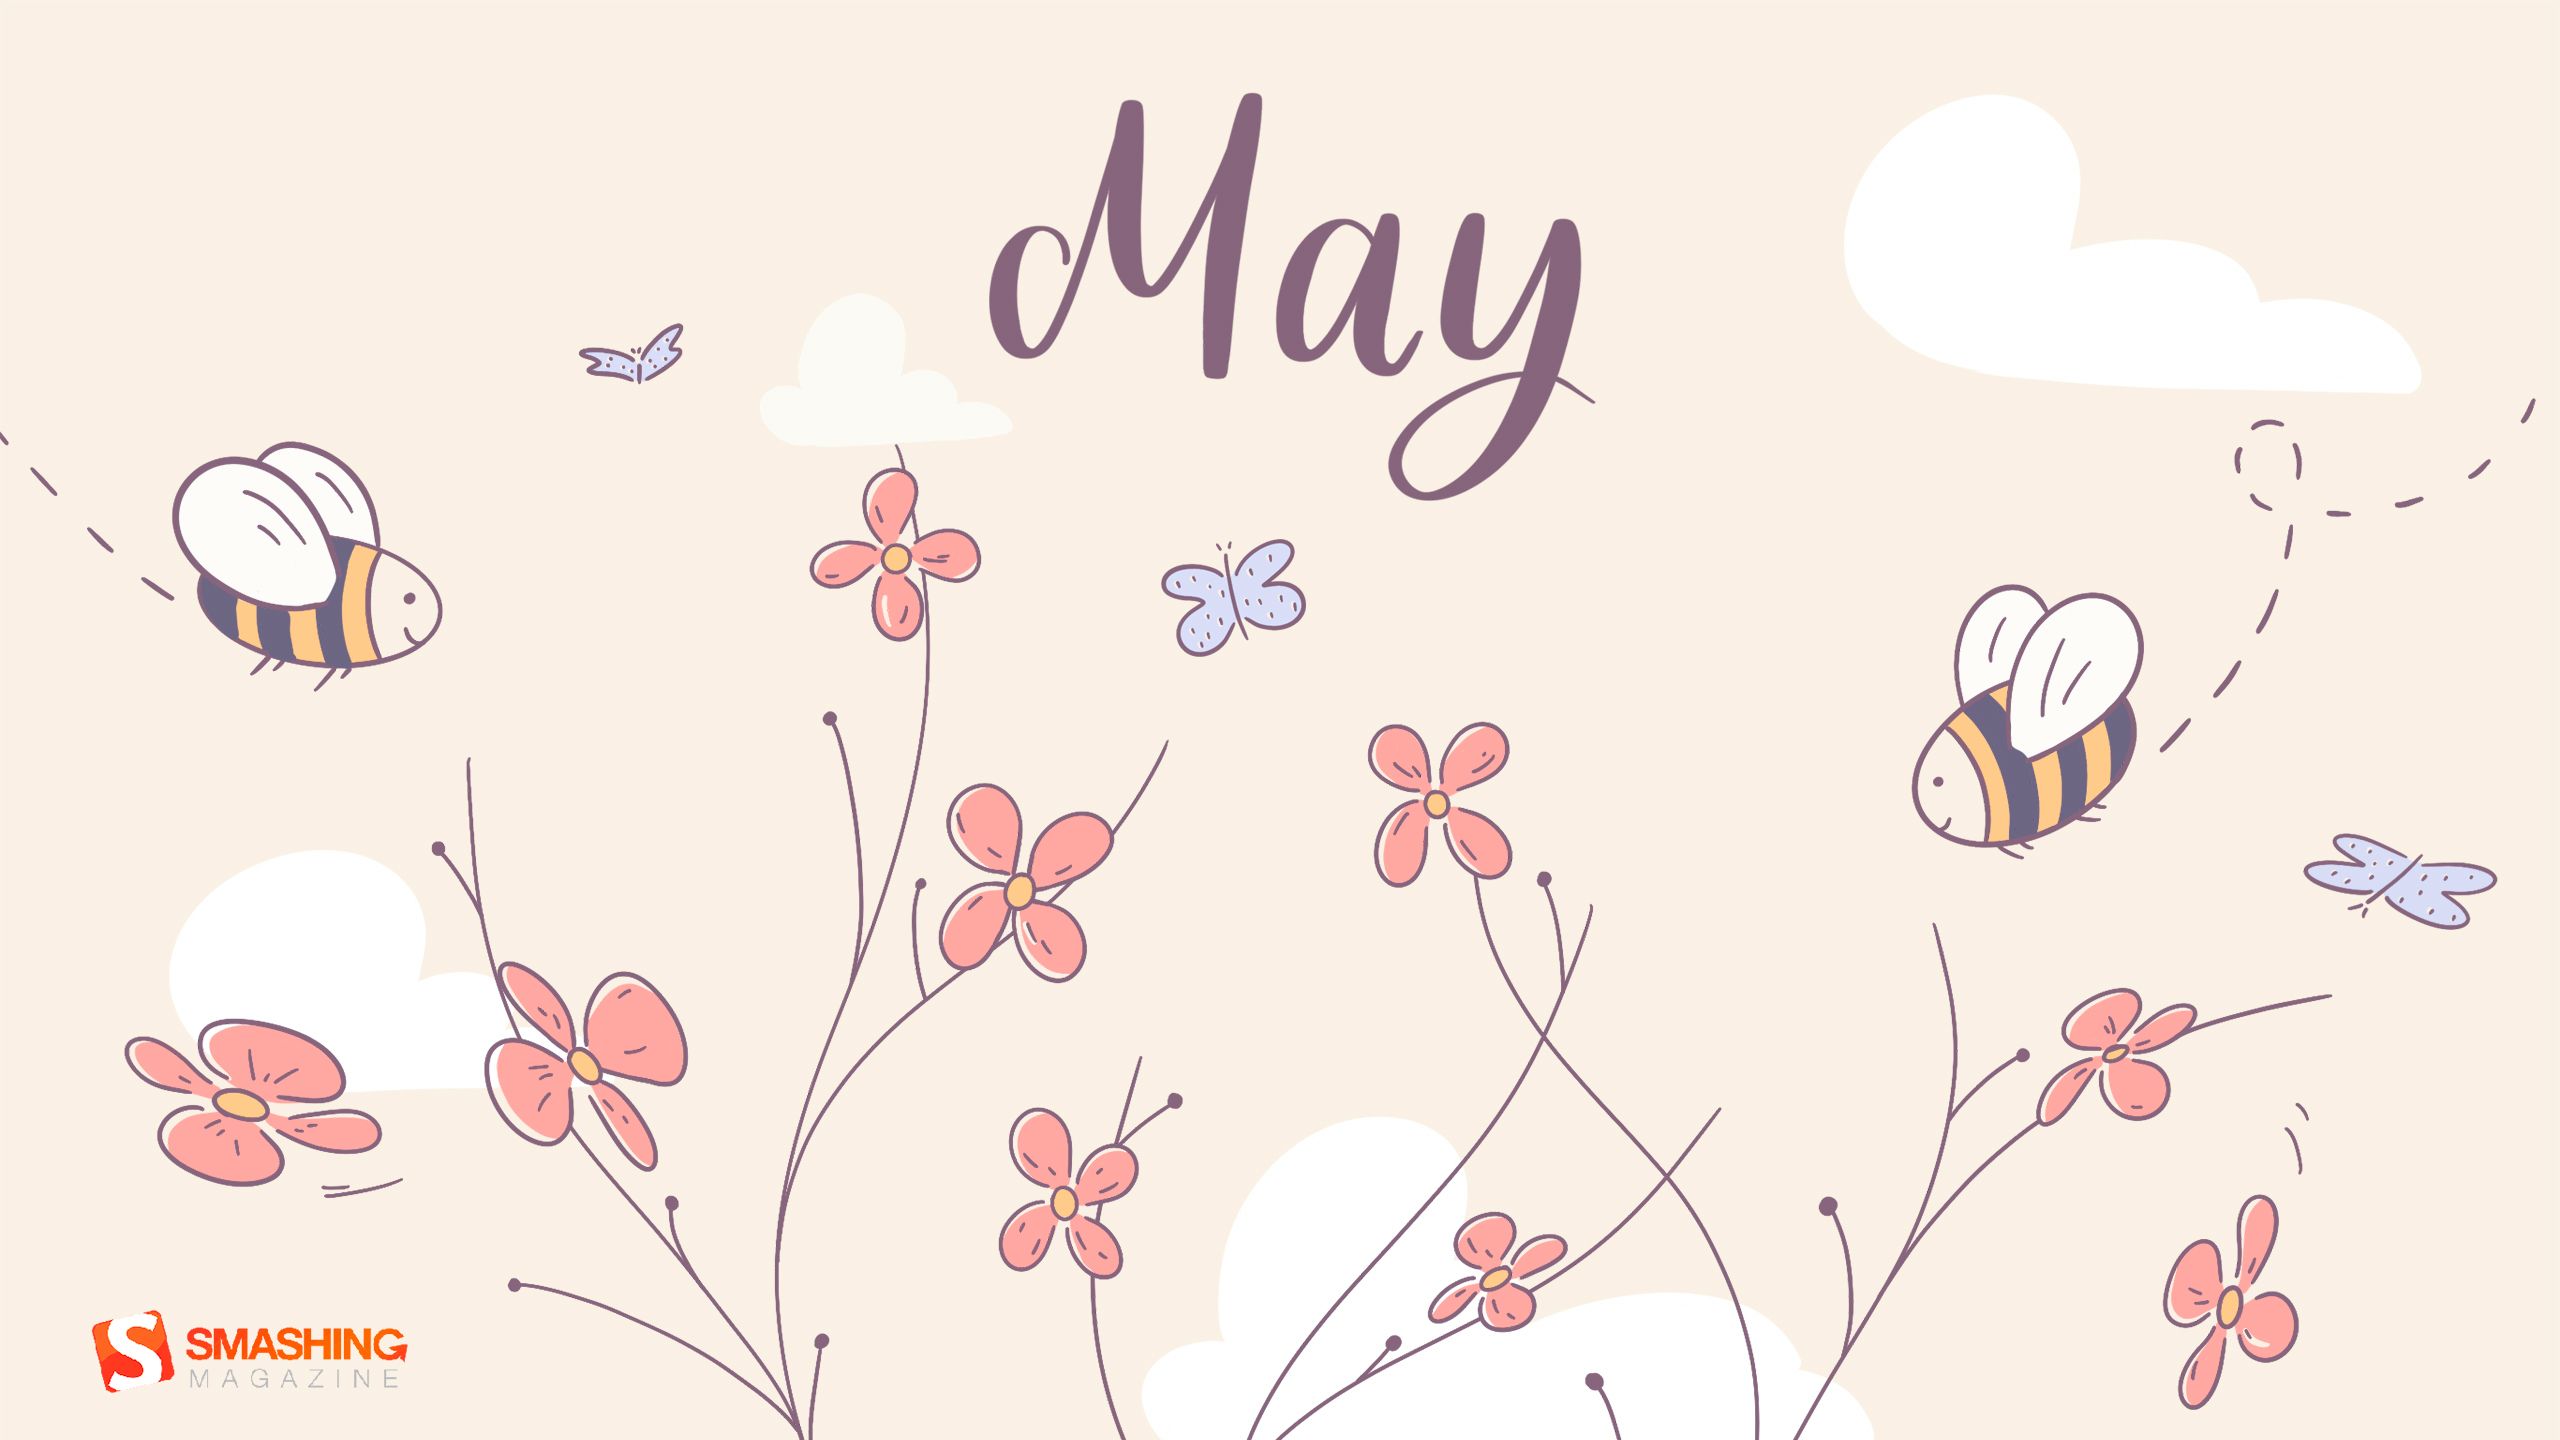 Brighten Up Someone's May (2020 Wallpaper Edition)